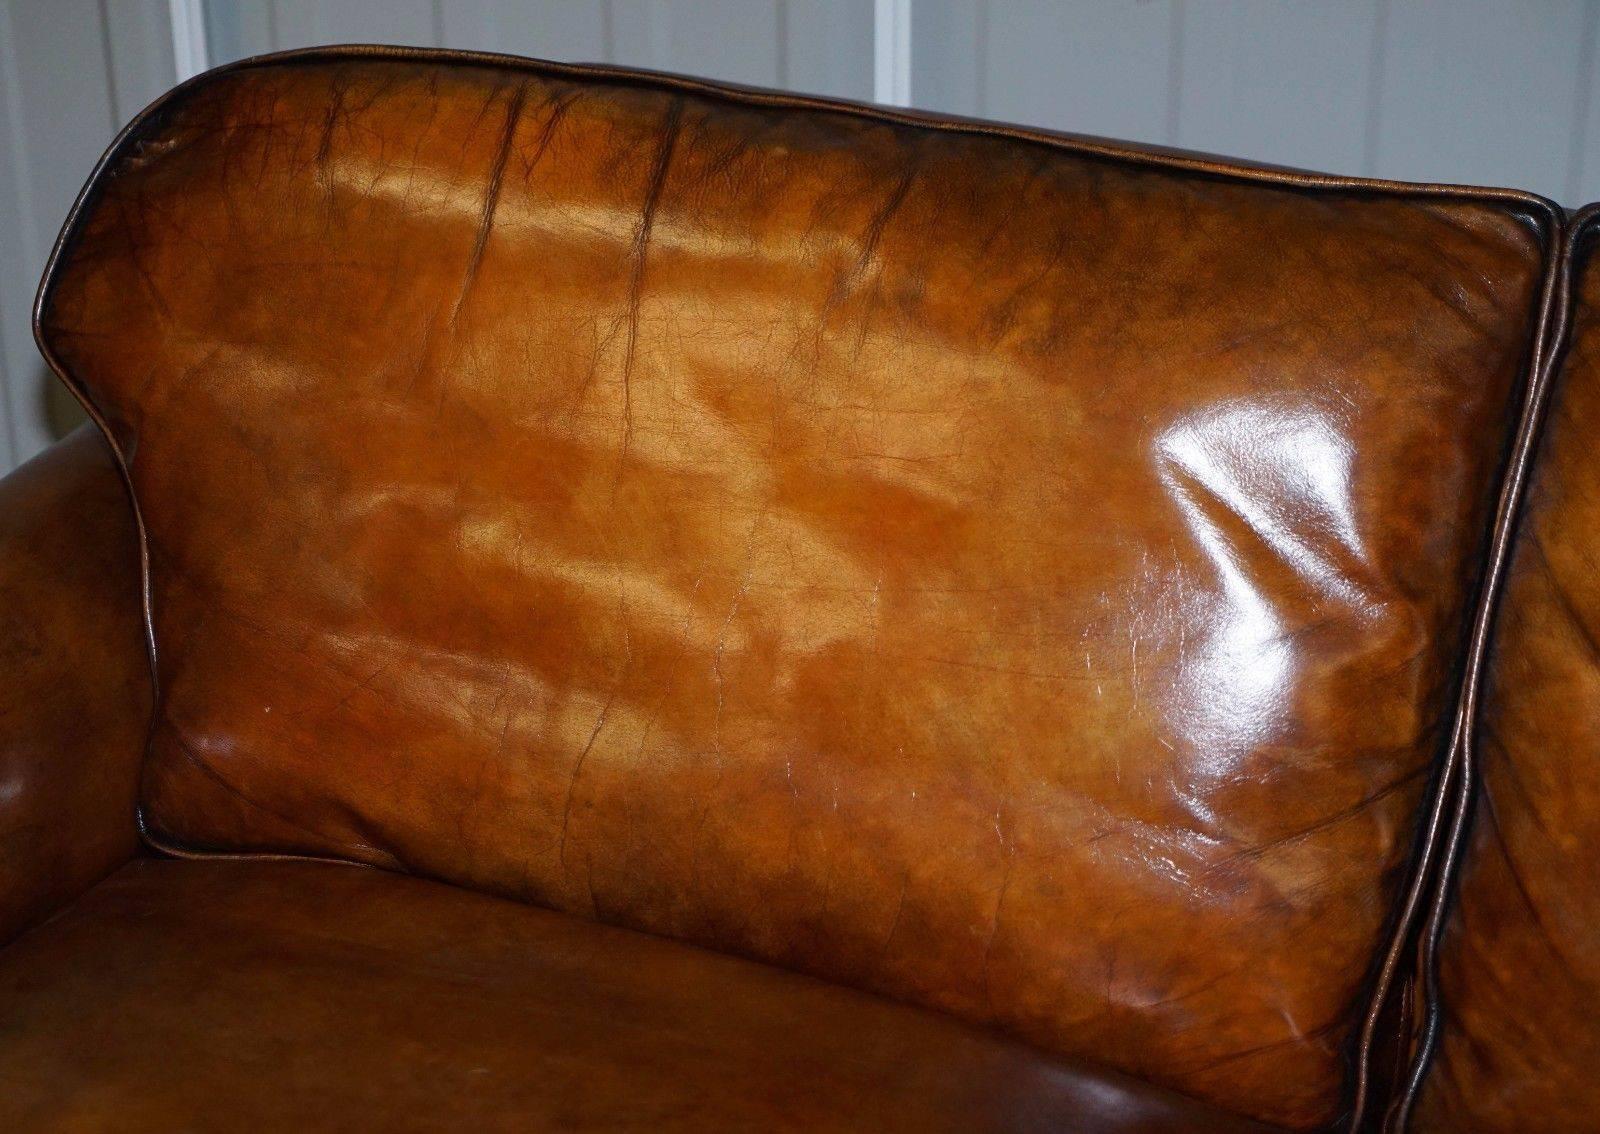 We are delighted to offer for sale this lovely original, circa 1910 Satinwood framed with claw and ball feet fully restored hand dyed whiskey brown leather sofa made by Elson LTD of Long Eaton

This suite is as rare as they come, the base frame is